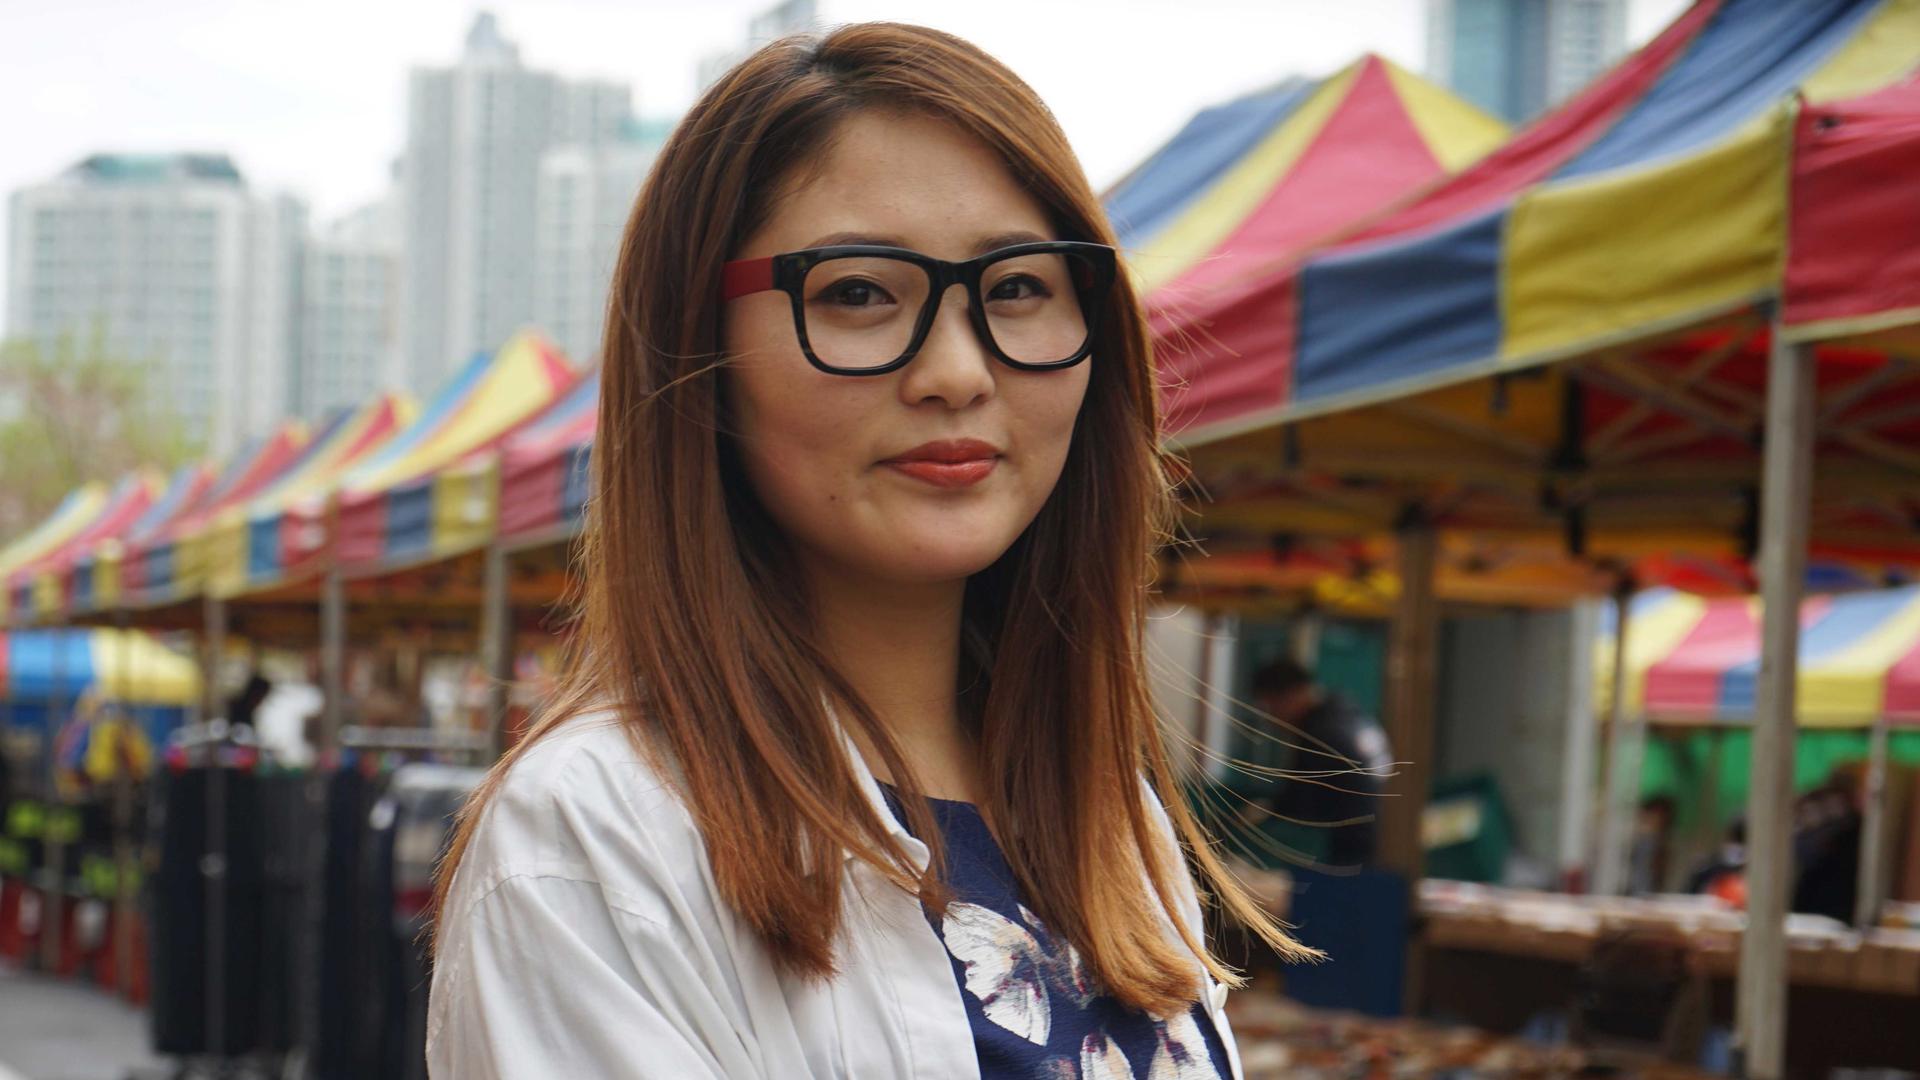 24-year old North Korean refugee Danbi was a smuggler in North Korea's black markets.  Here she gives us a tour of a market in South Korea, which reminds her of the markets in the North.